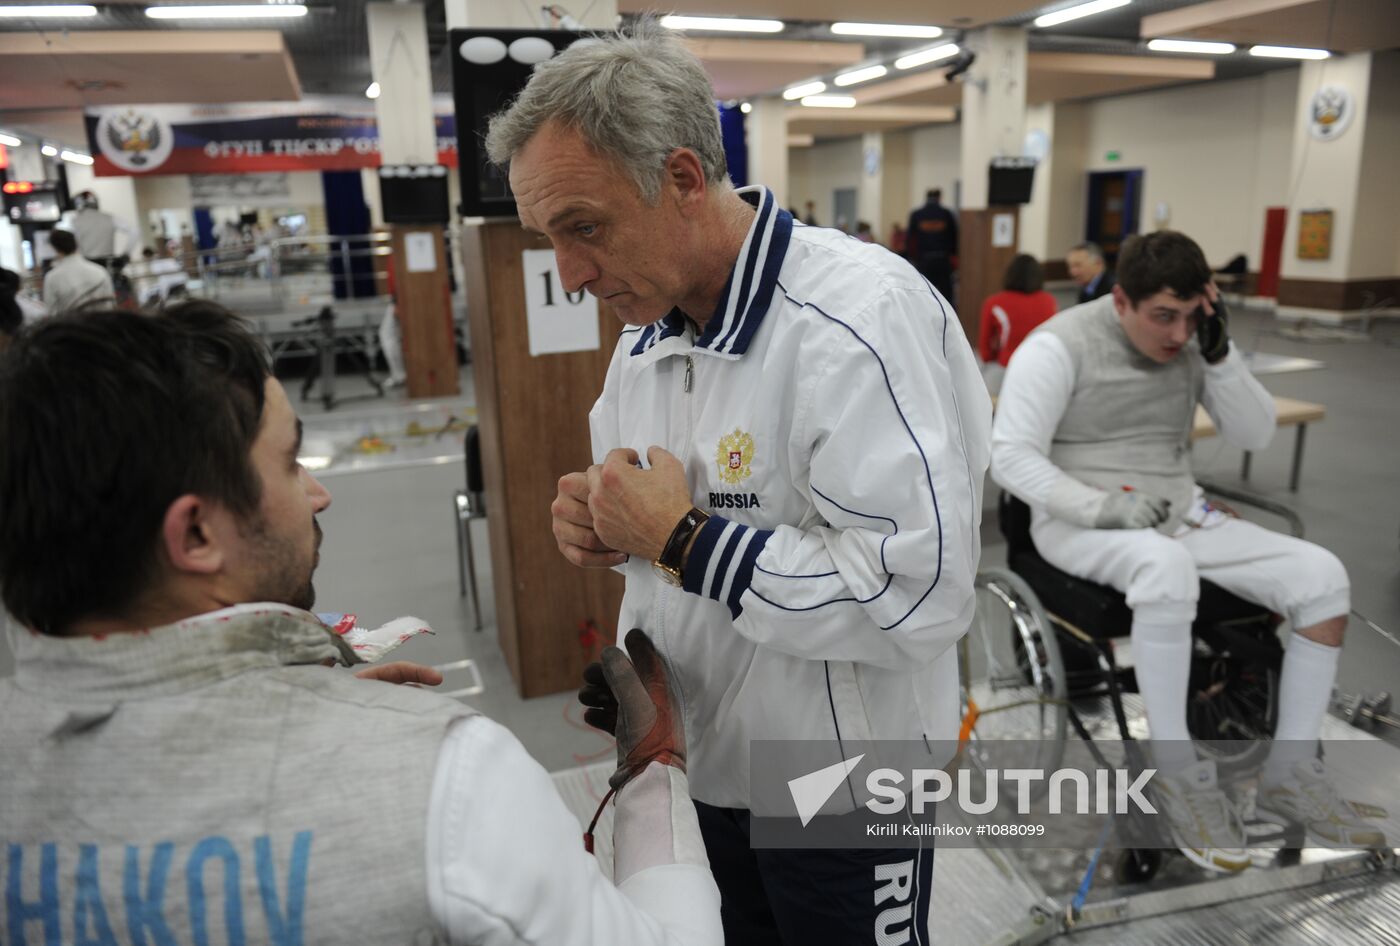 7th Championship of Wheelchair Fencing in Moscow region